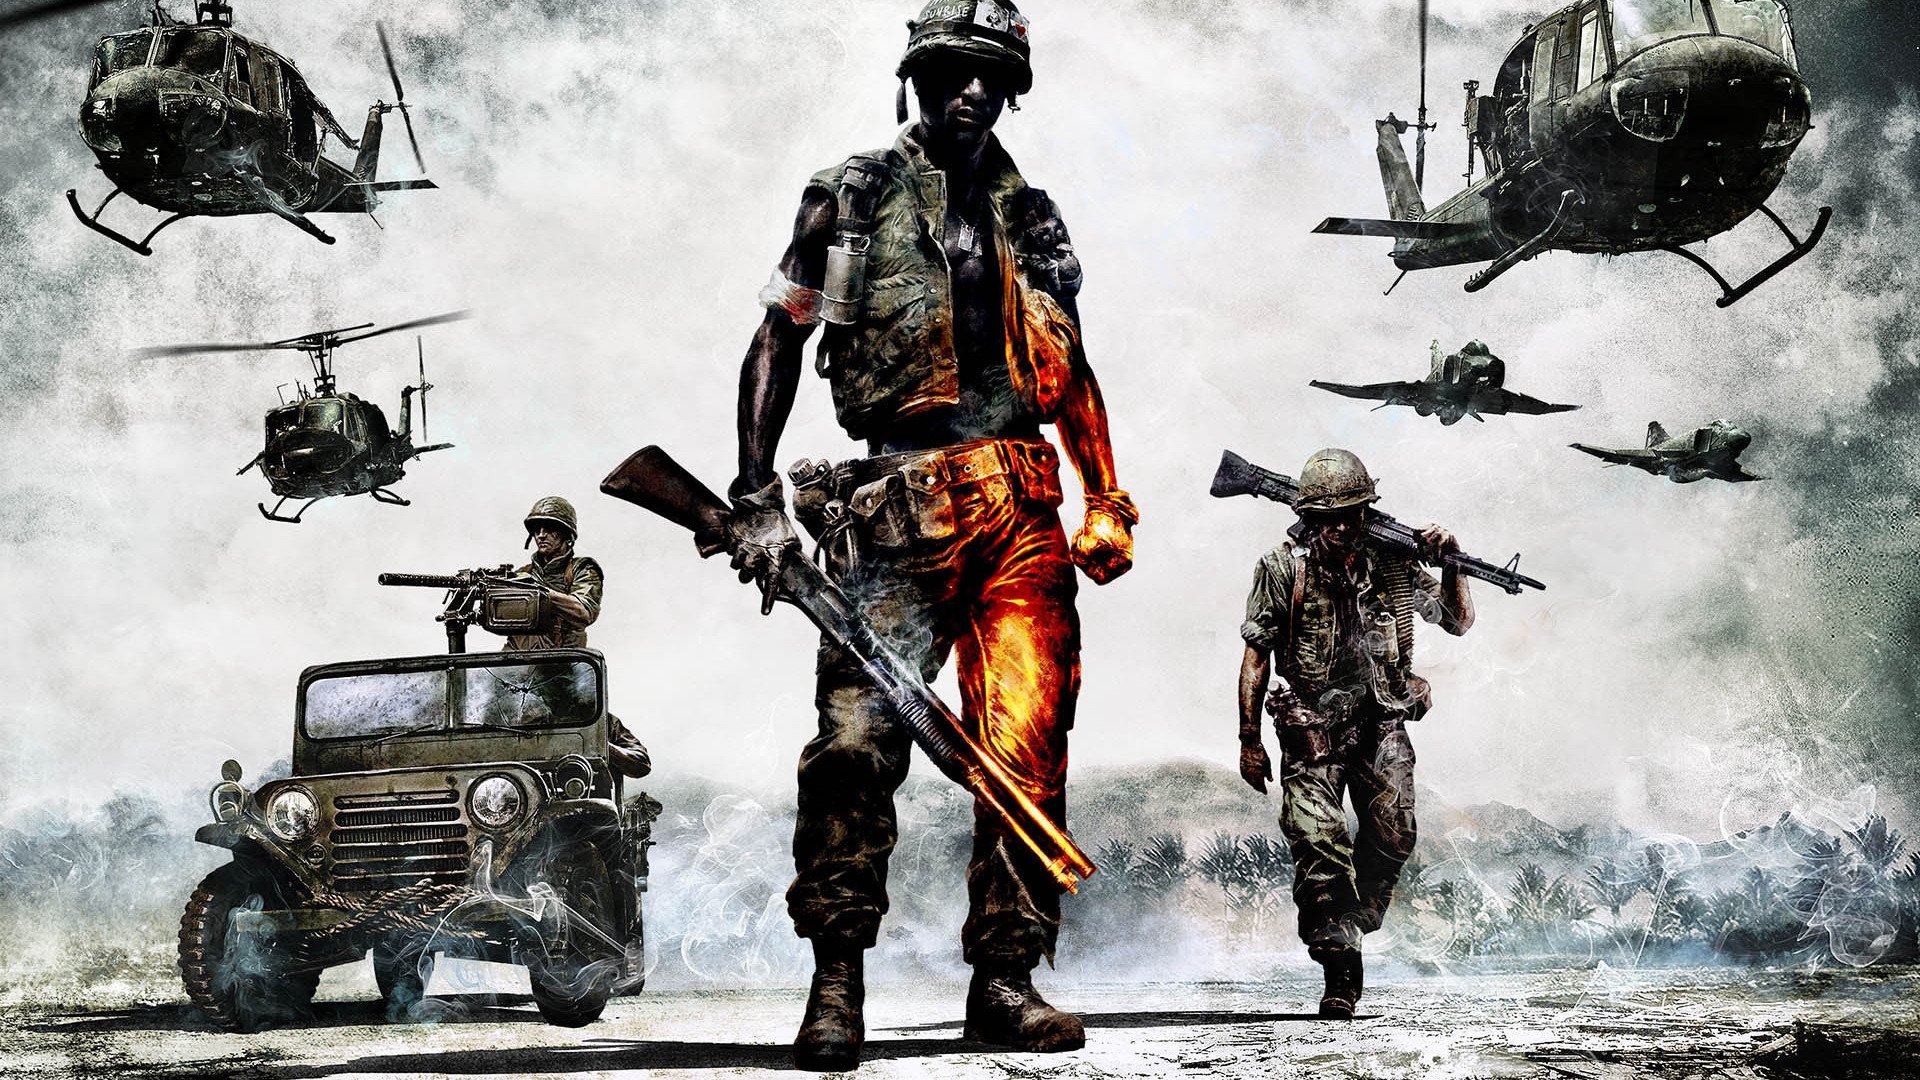 Battlefield Bad Company 2 Game for 1920 x 1080 HDTV 1080p resolution